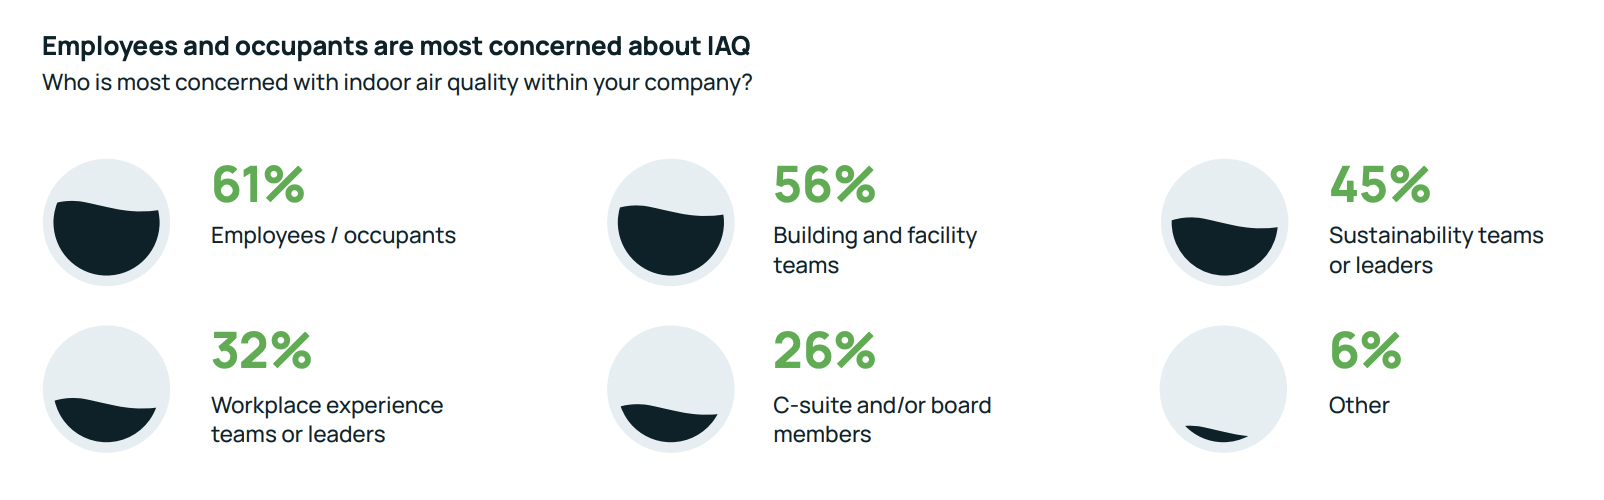 1-employees-occupants-most-concerned-iaq